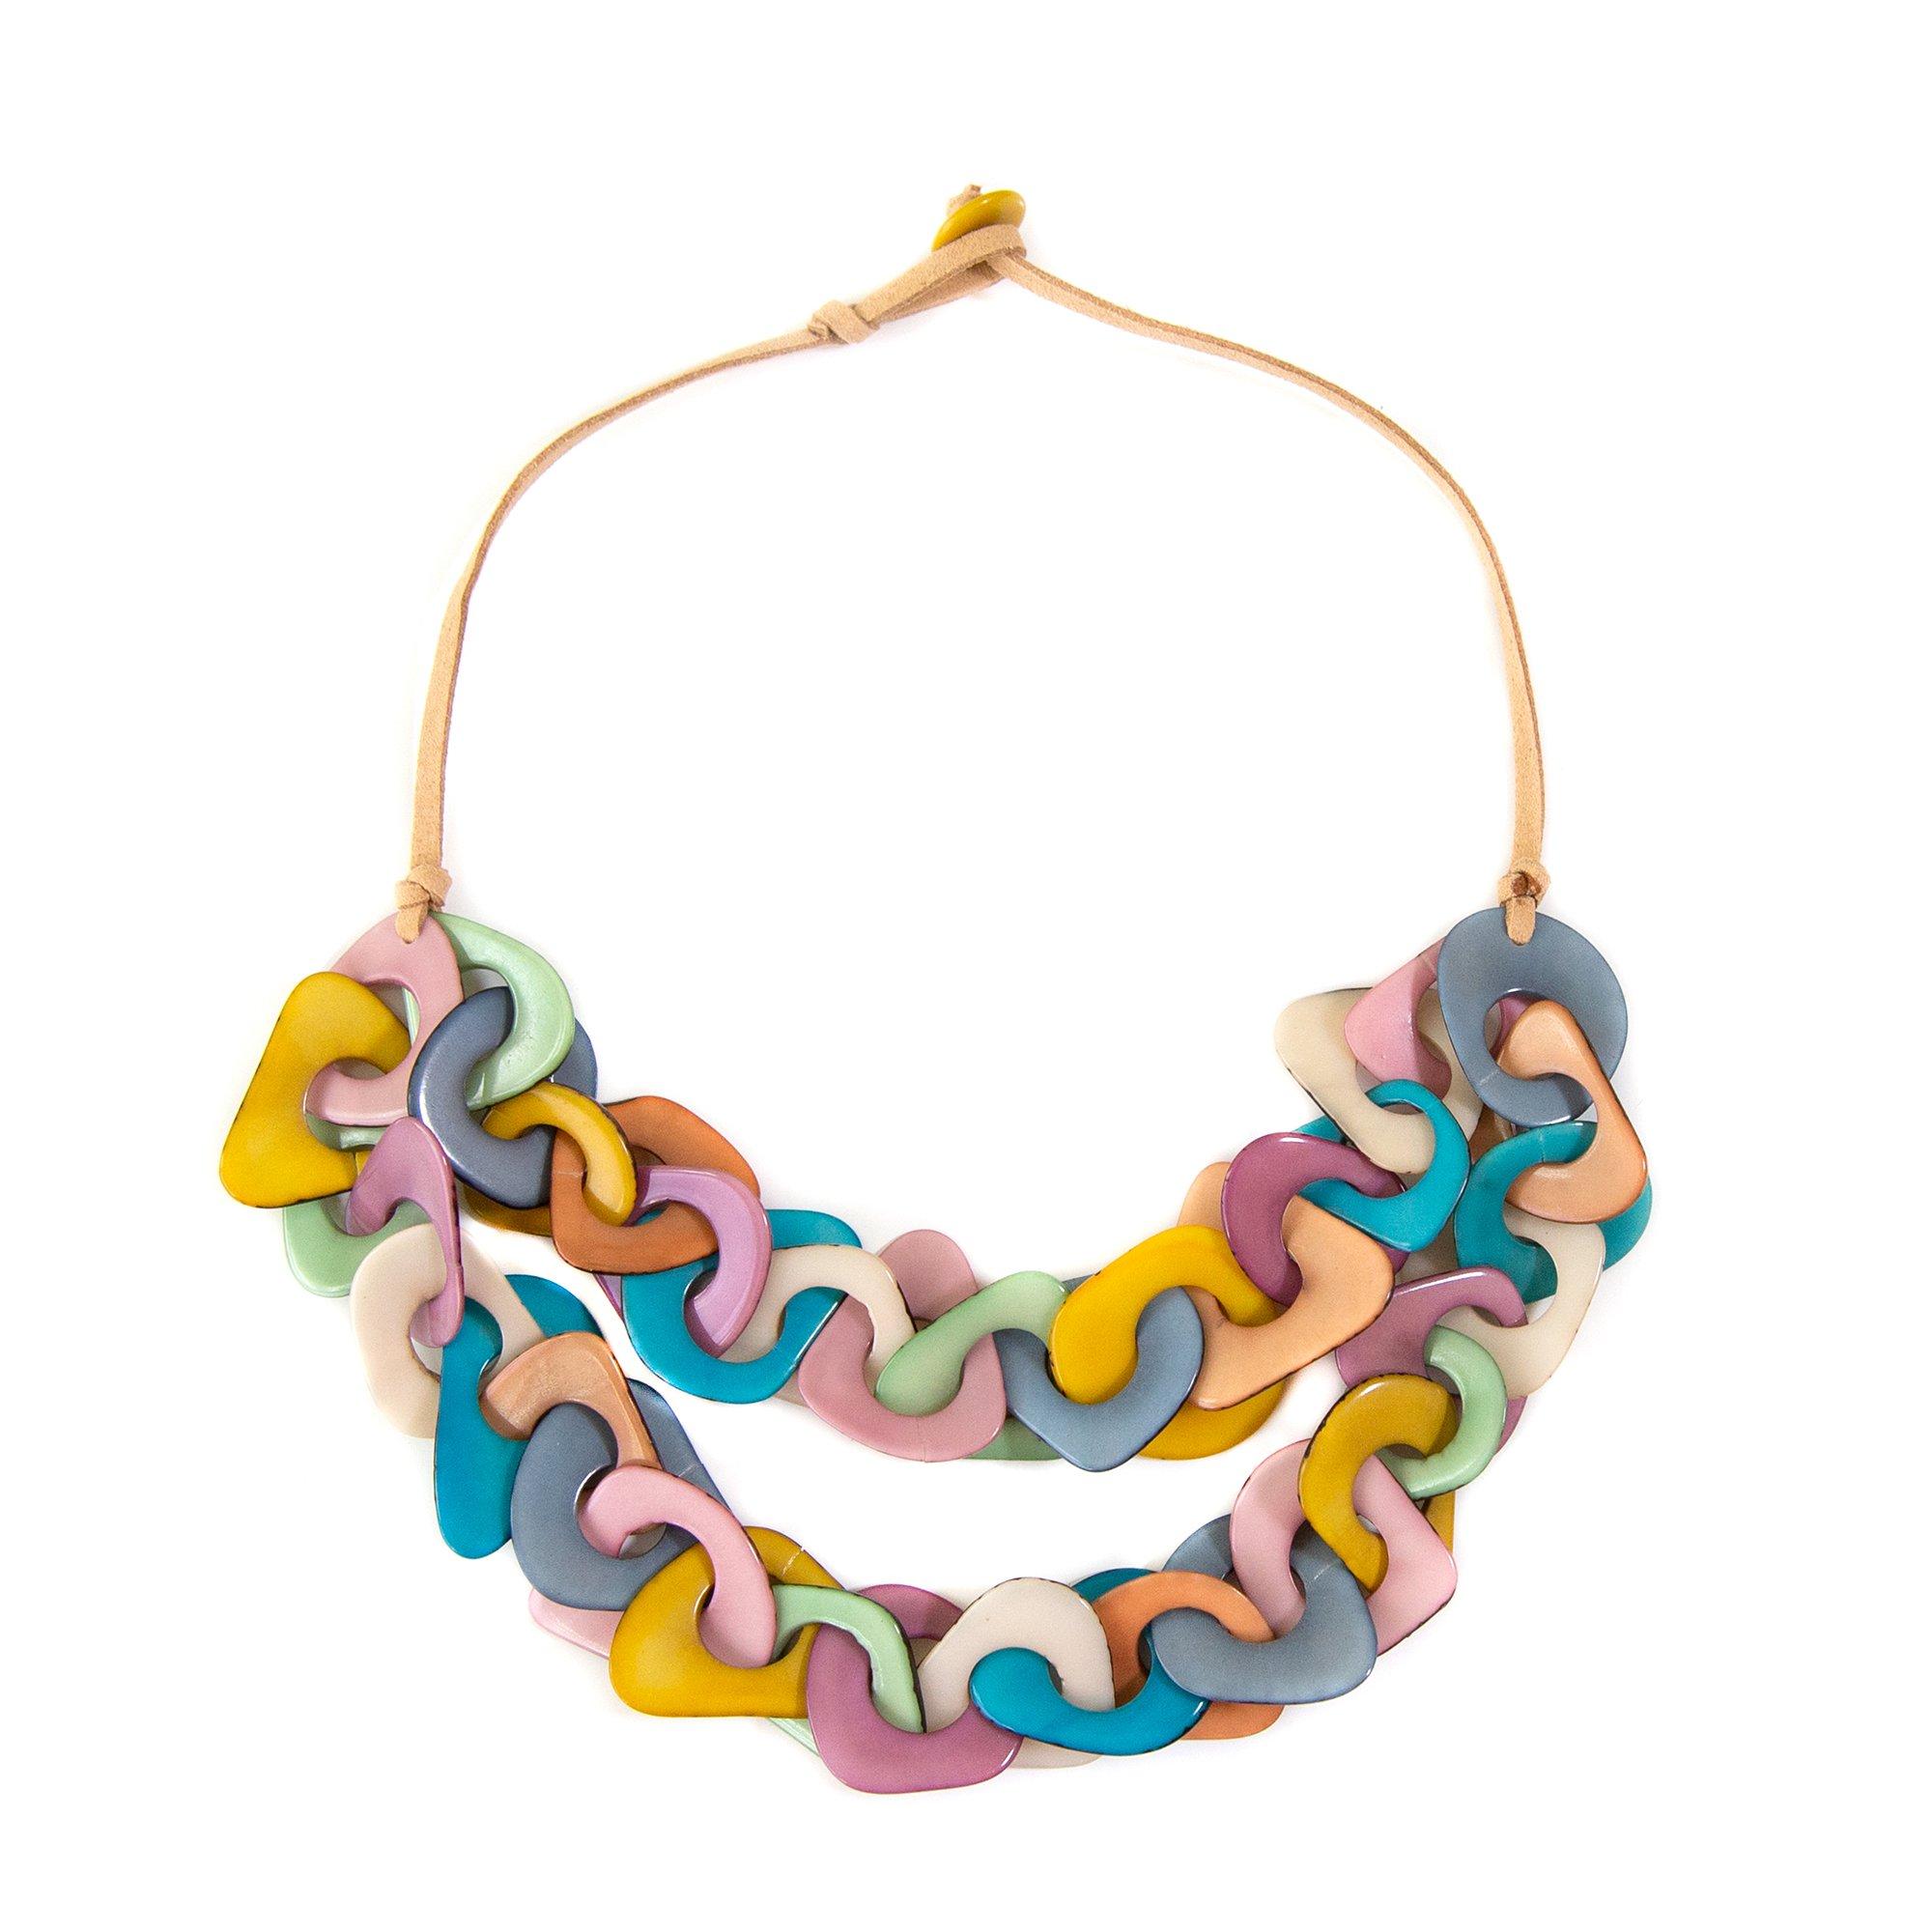 Tagua 2-Row 18 In. Multi-Colored Link Cord Toggle Necklace